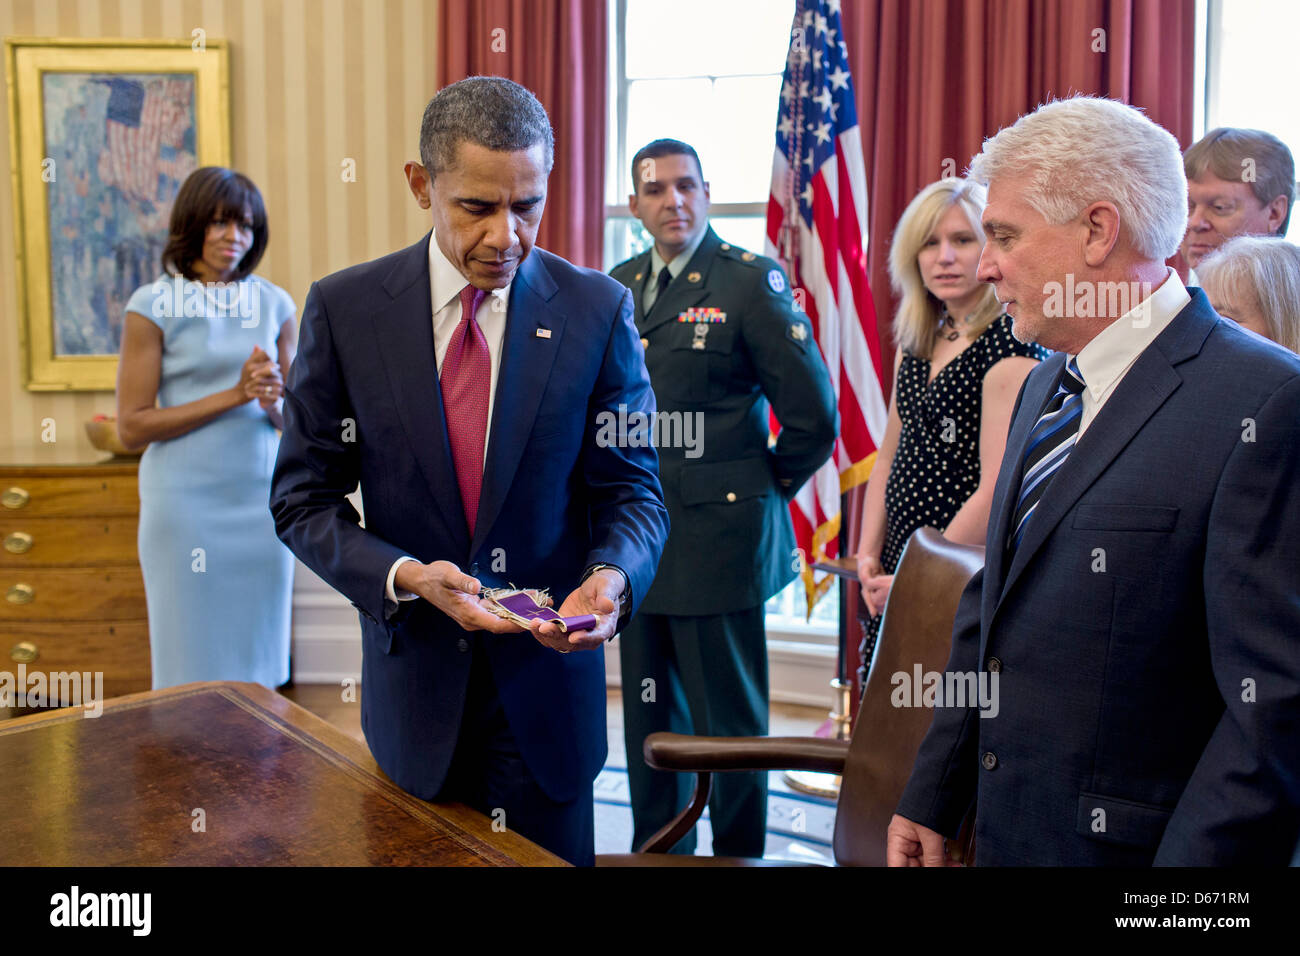 US President Barack Obama holds Father Emil Kapaun's Easter stole while meeting with the Kapaun family in the Oval Office of the White House April 11, 2013 in Washington, DC. The President and First Lady Michelle Obama met with members of the family before awarding him the Medal of Honor posthumously during a ceremony in the East Room. Father Kapaun was honored for his heroism during combat at Unsan, Korea and later died as a POW. Stock Photo